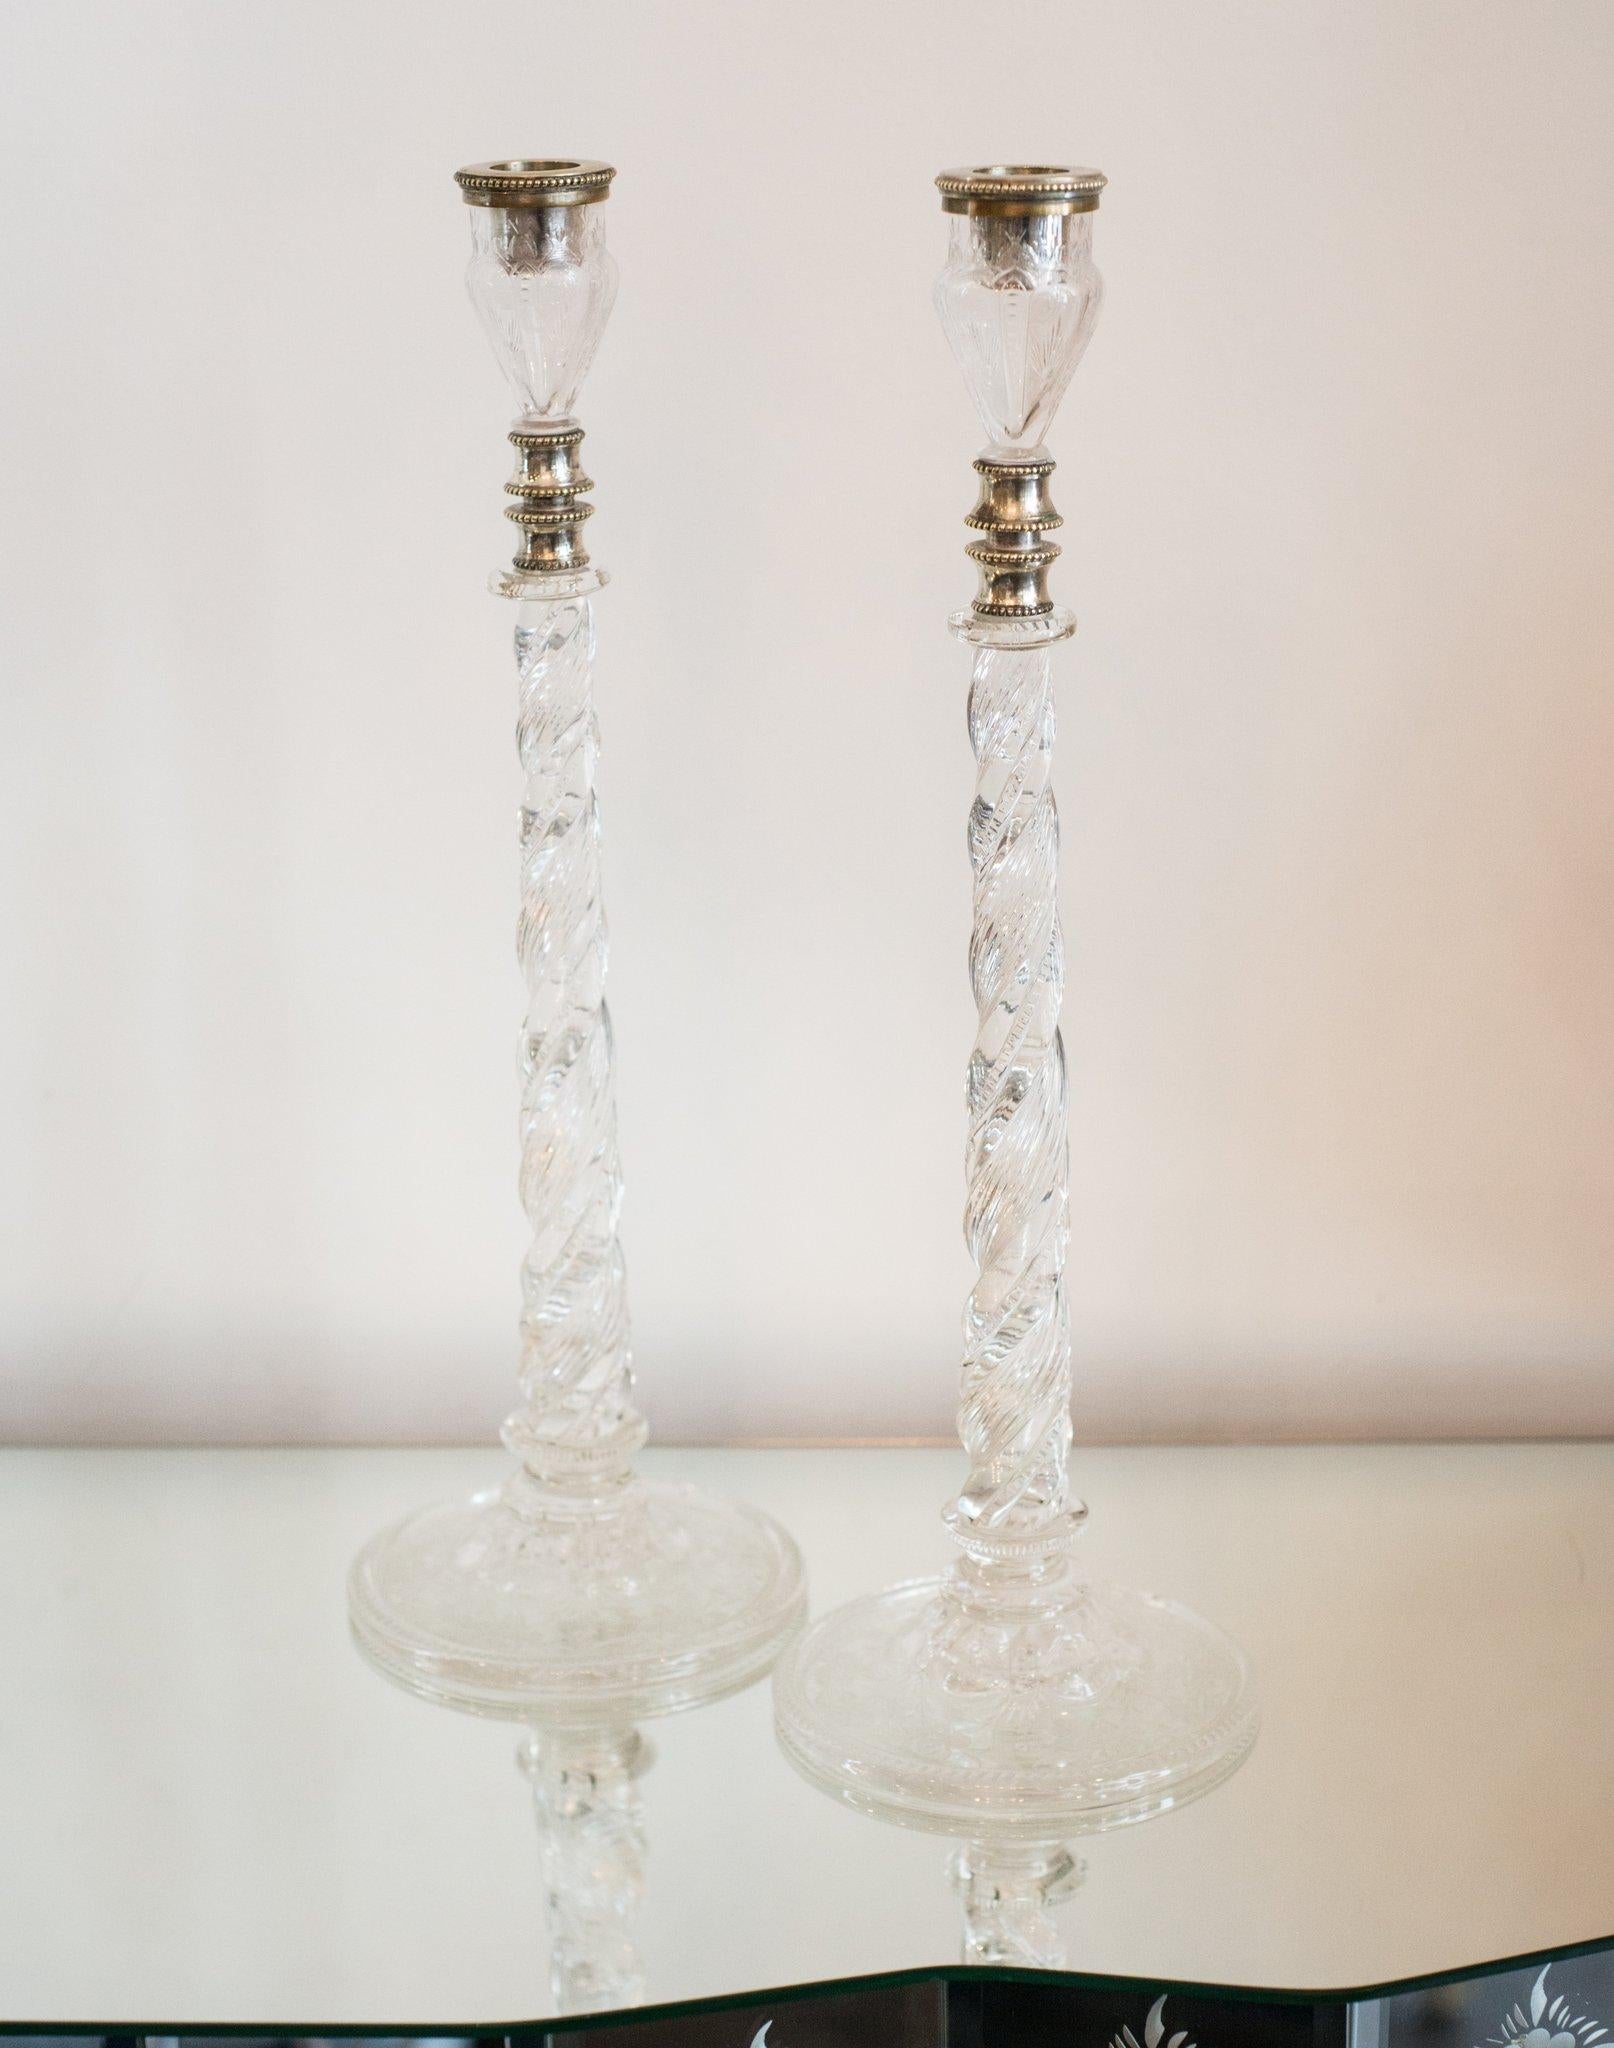 This classic pair of antique crystal and silver candlesticks would make a perfect gift to suit anyone's style, be it traditional or contemporary.